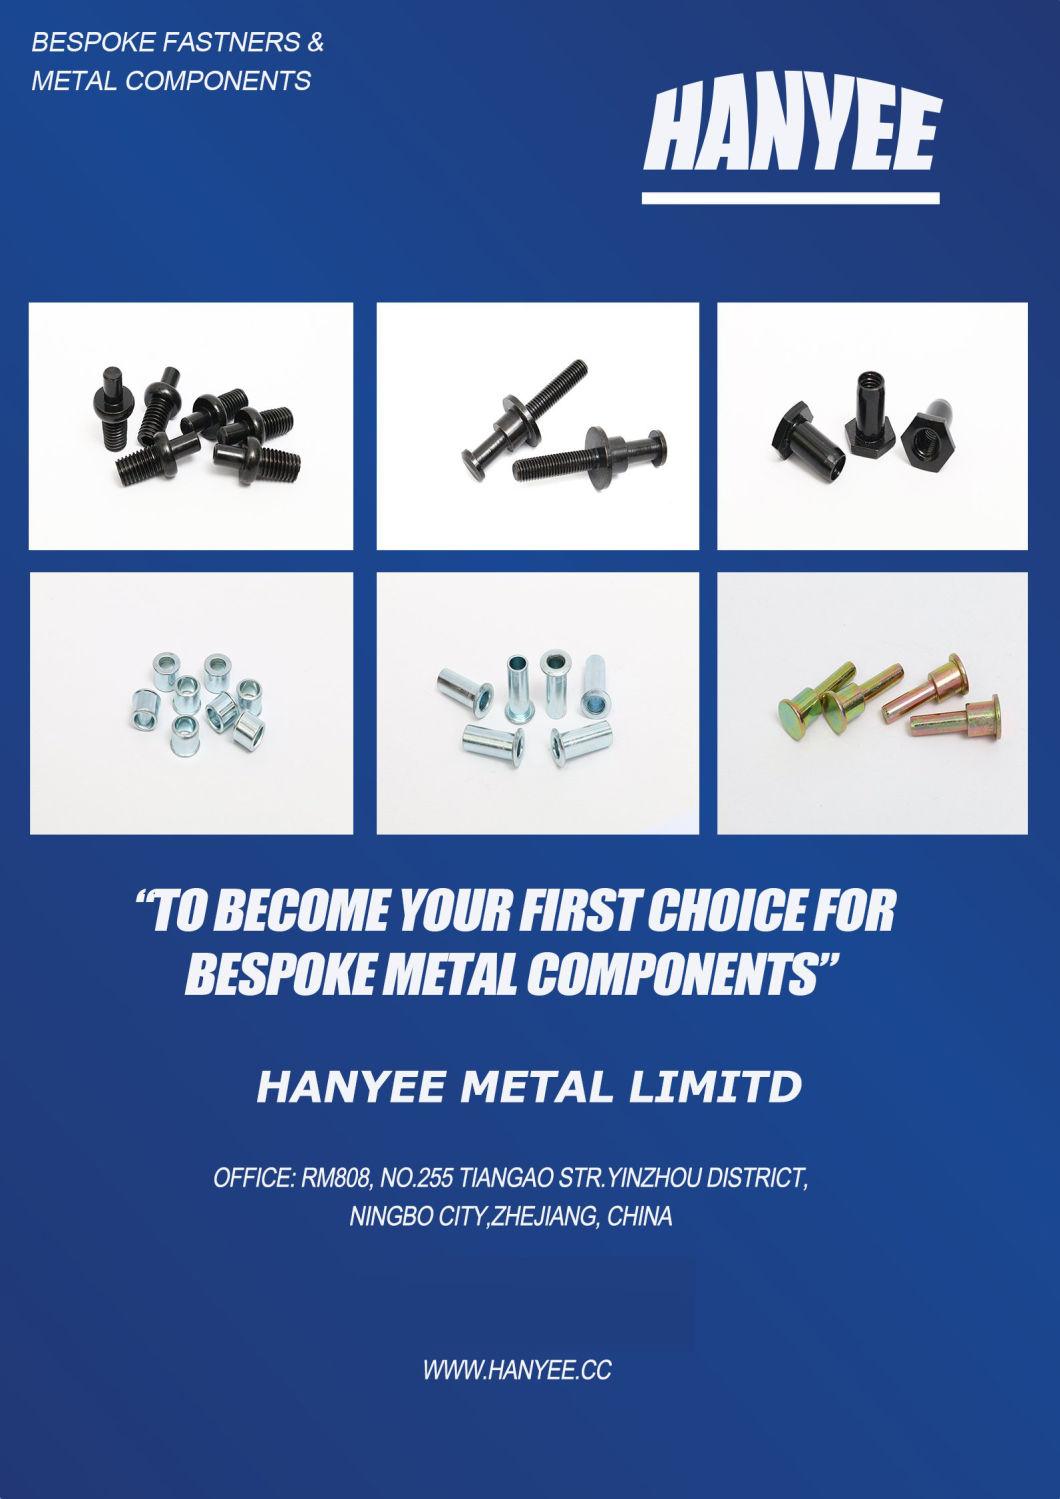 High Quality Znic Plating Delivery 15-30days Customized Rivet for Machinery by Hanyee Metal in Zhejiang